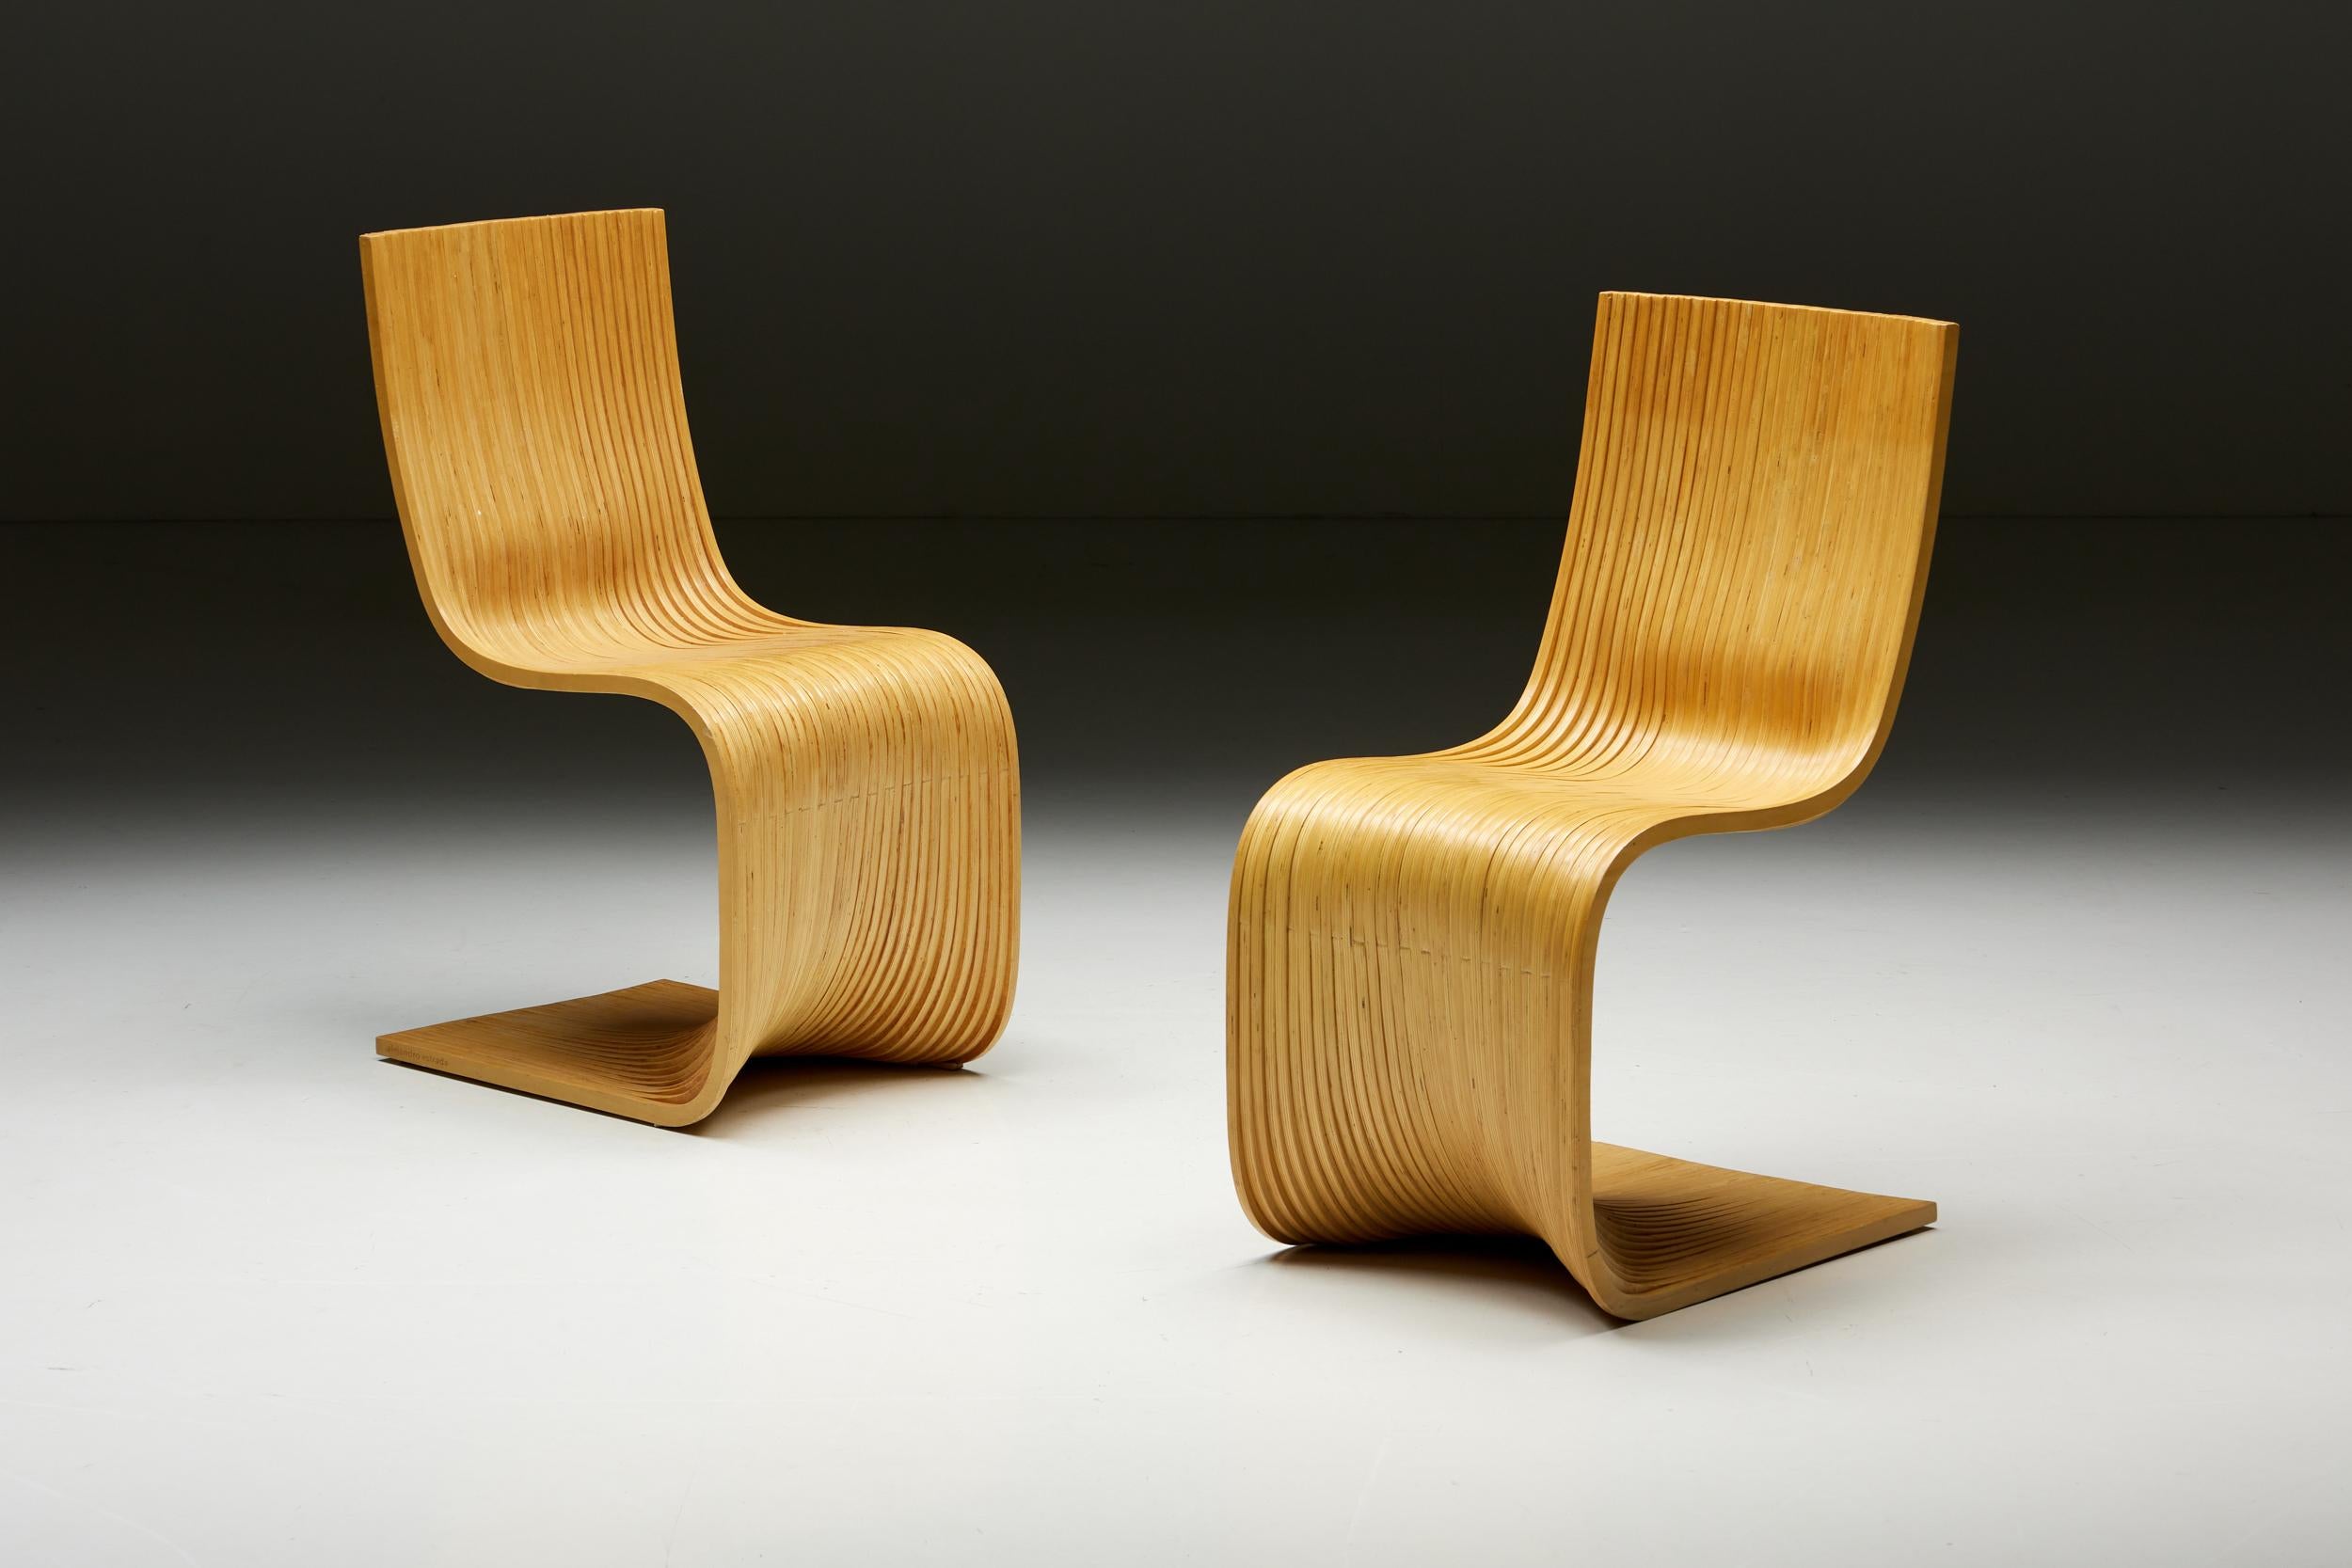 Bamboo dining chairs by Estrada Plywood contour or 